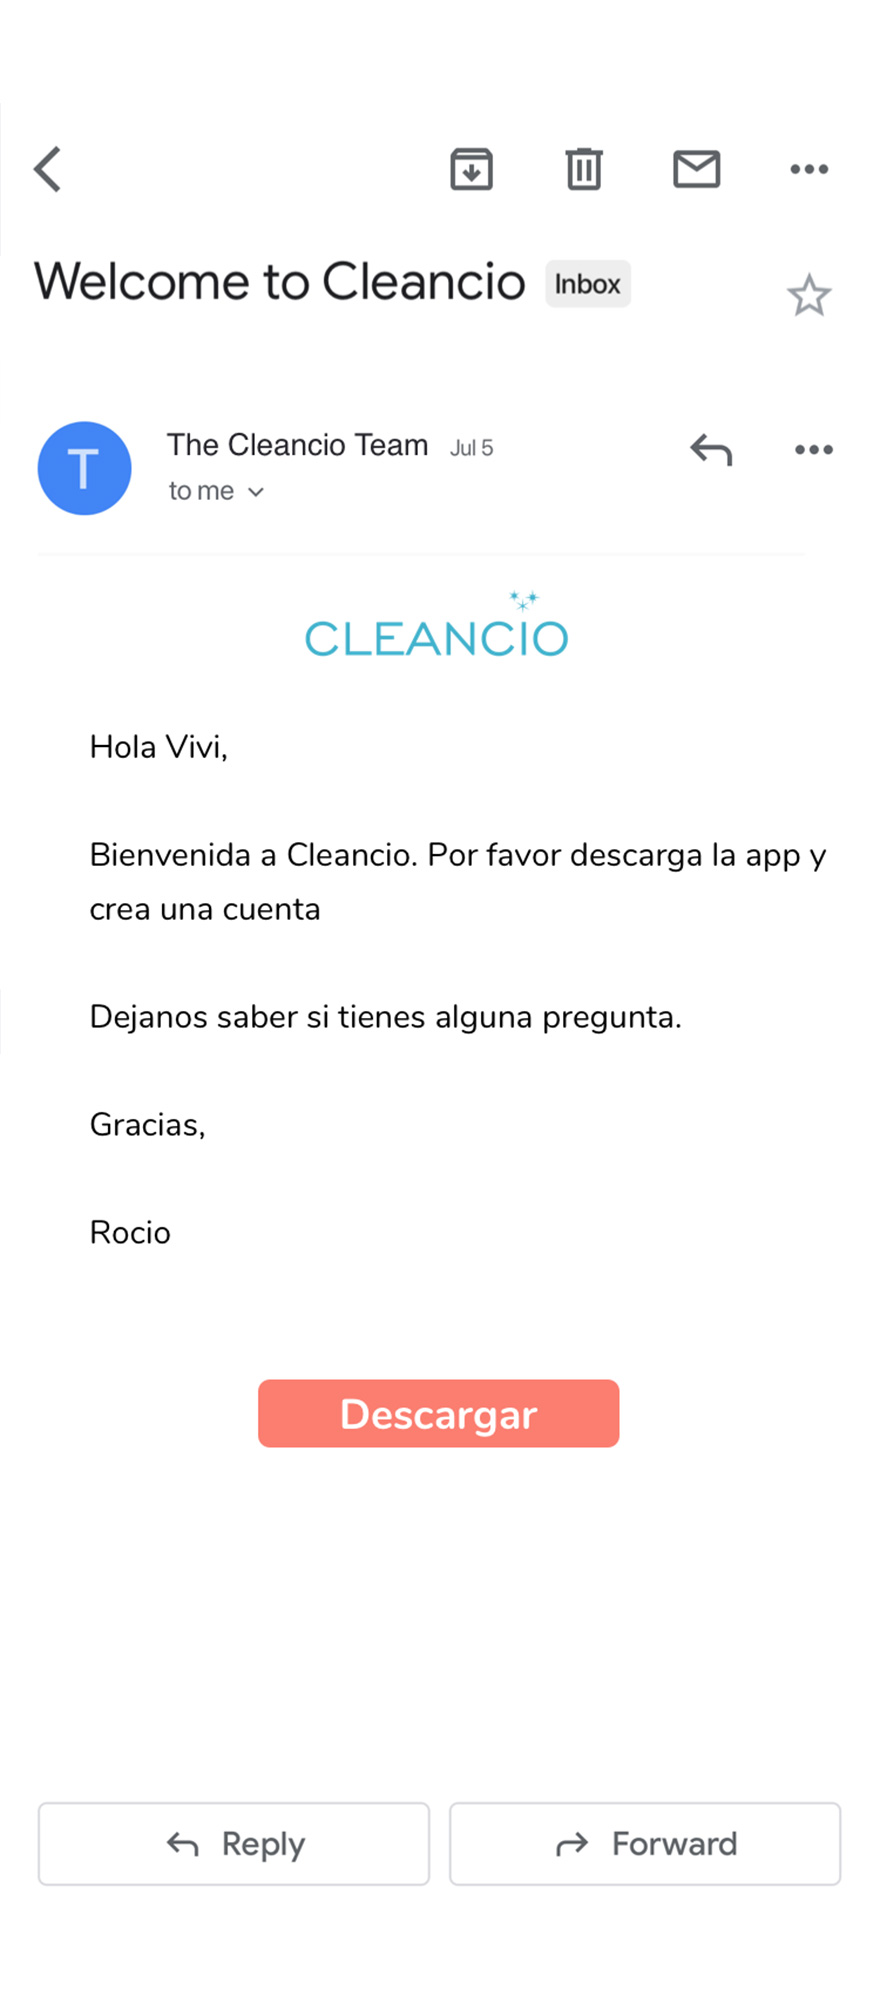 Email to new Cleancios, asking them to download the app. (In Spanish)